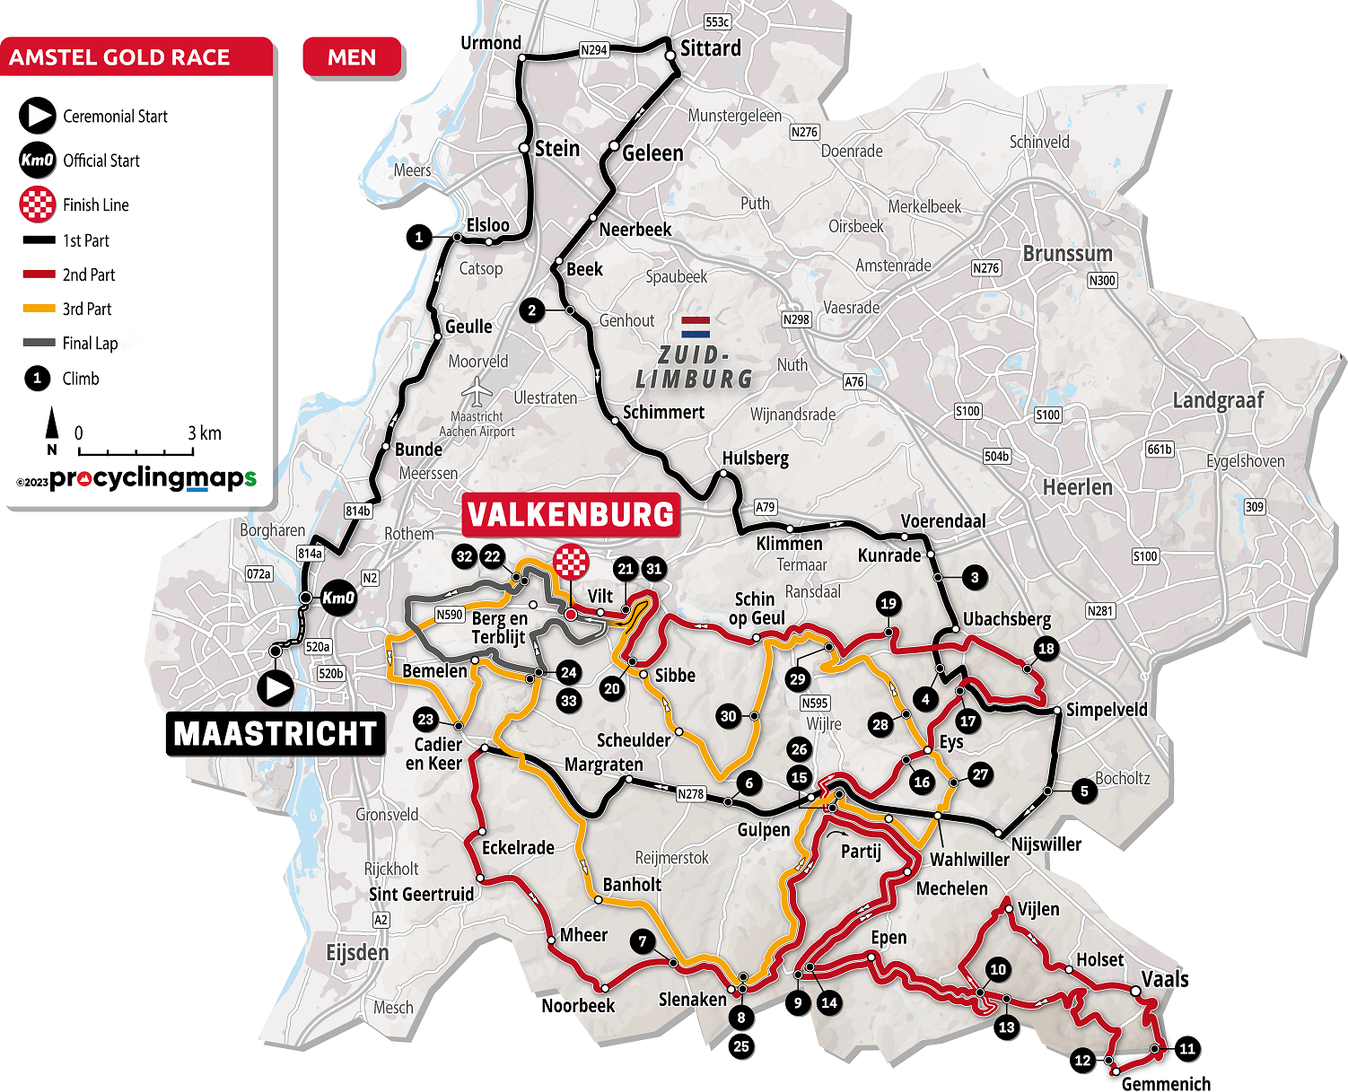 The route for the men's Amstel Gold Race 2024